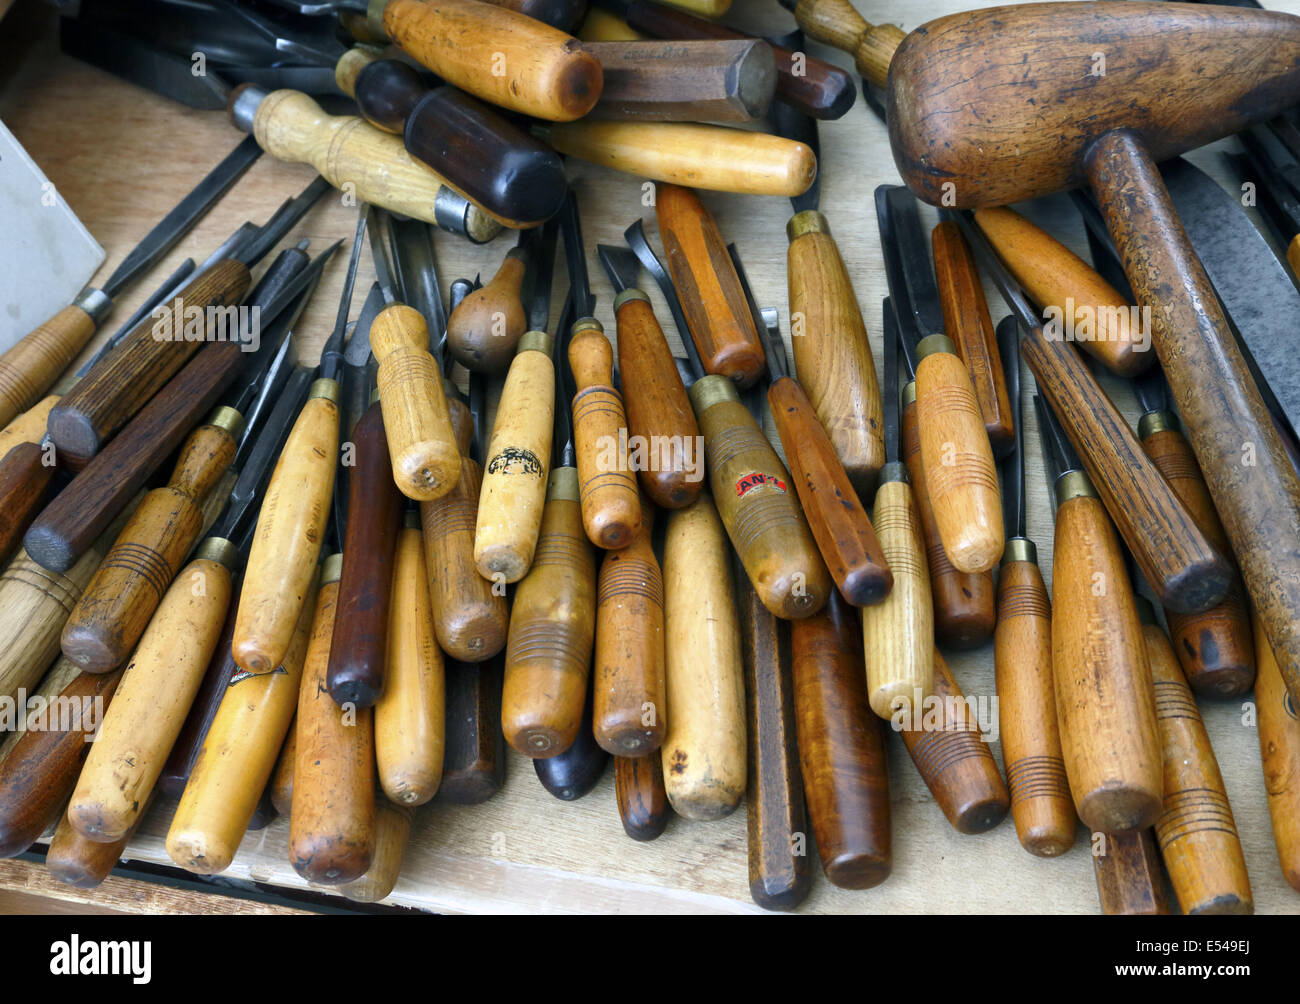 Old chisels & carving tools Stock Photo - Alamy